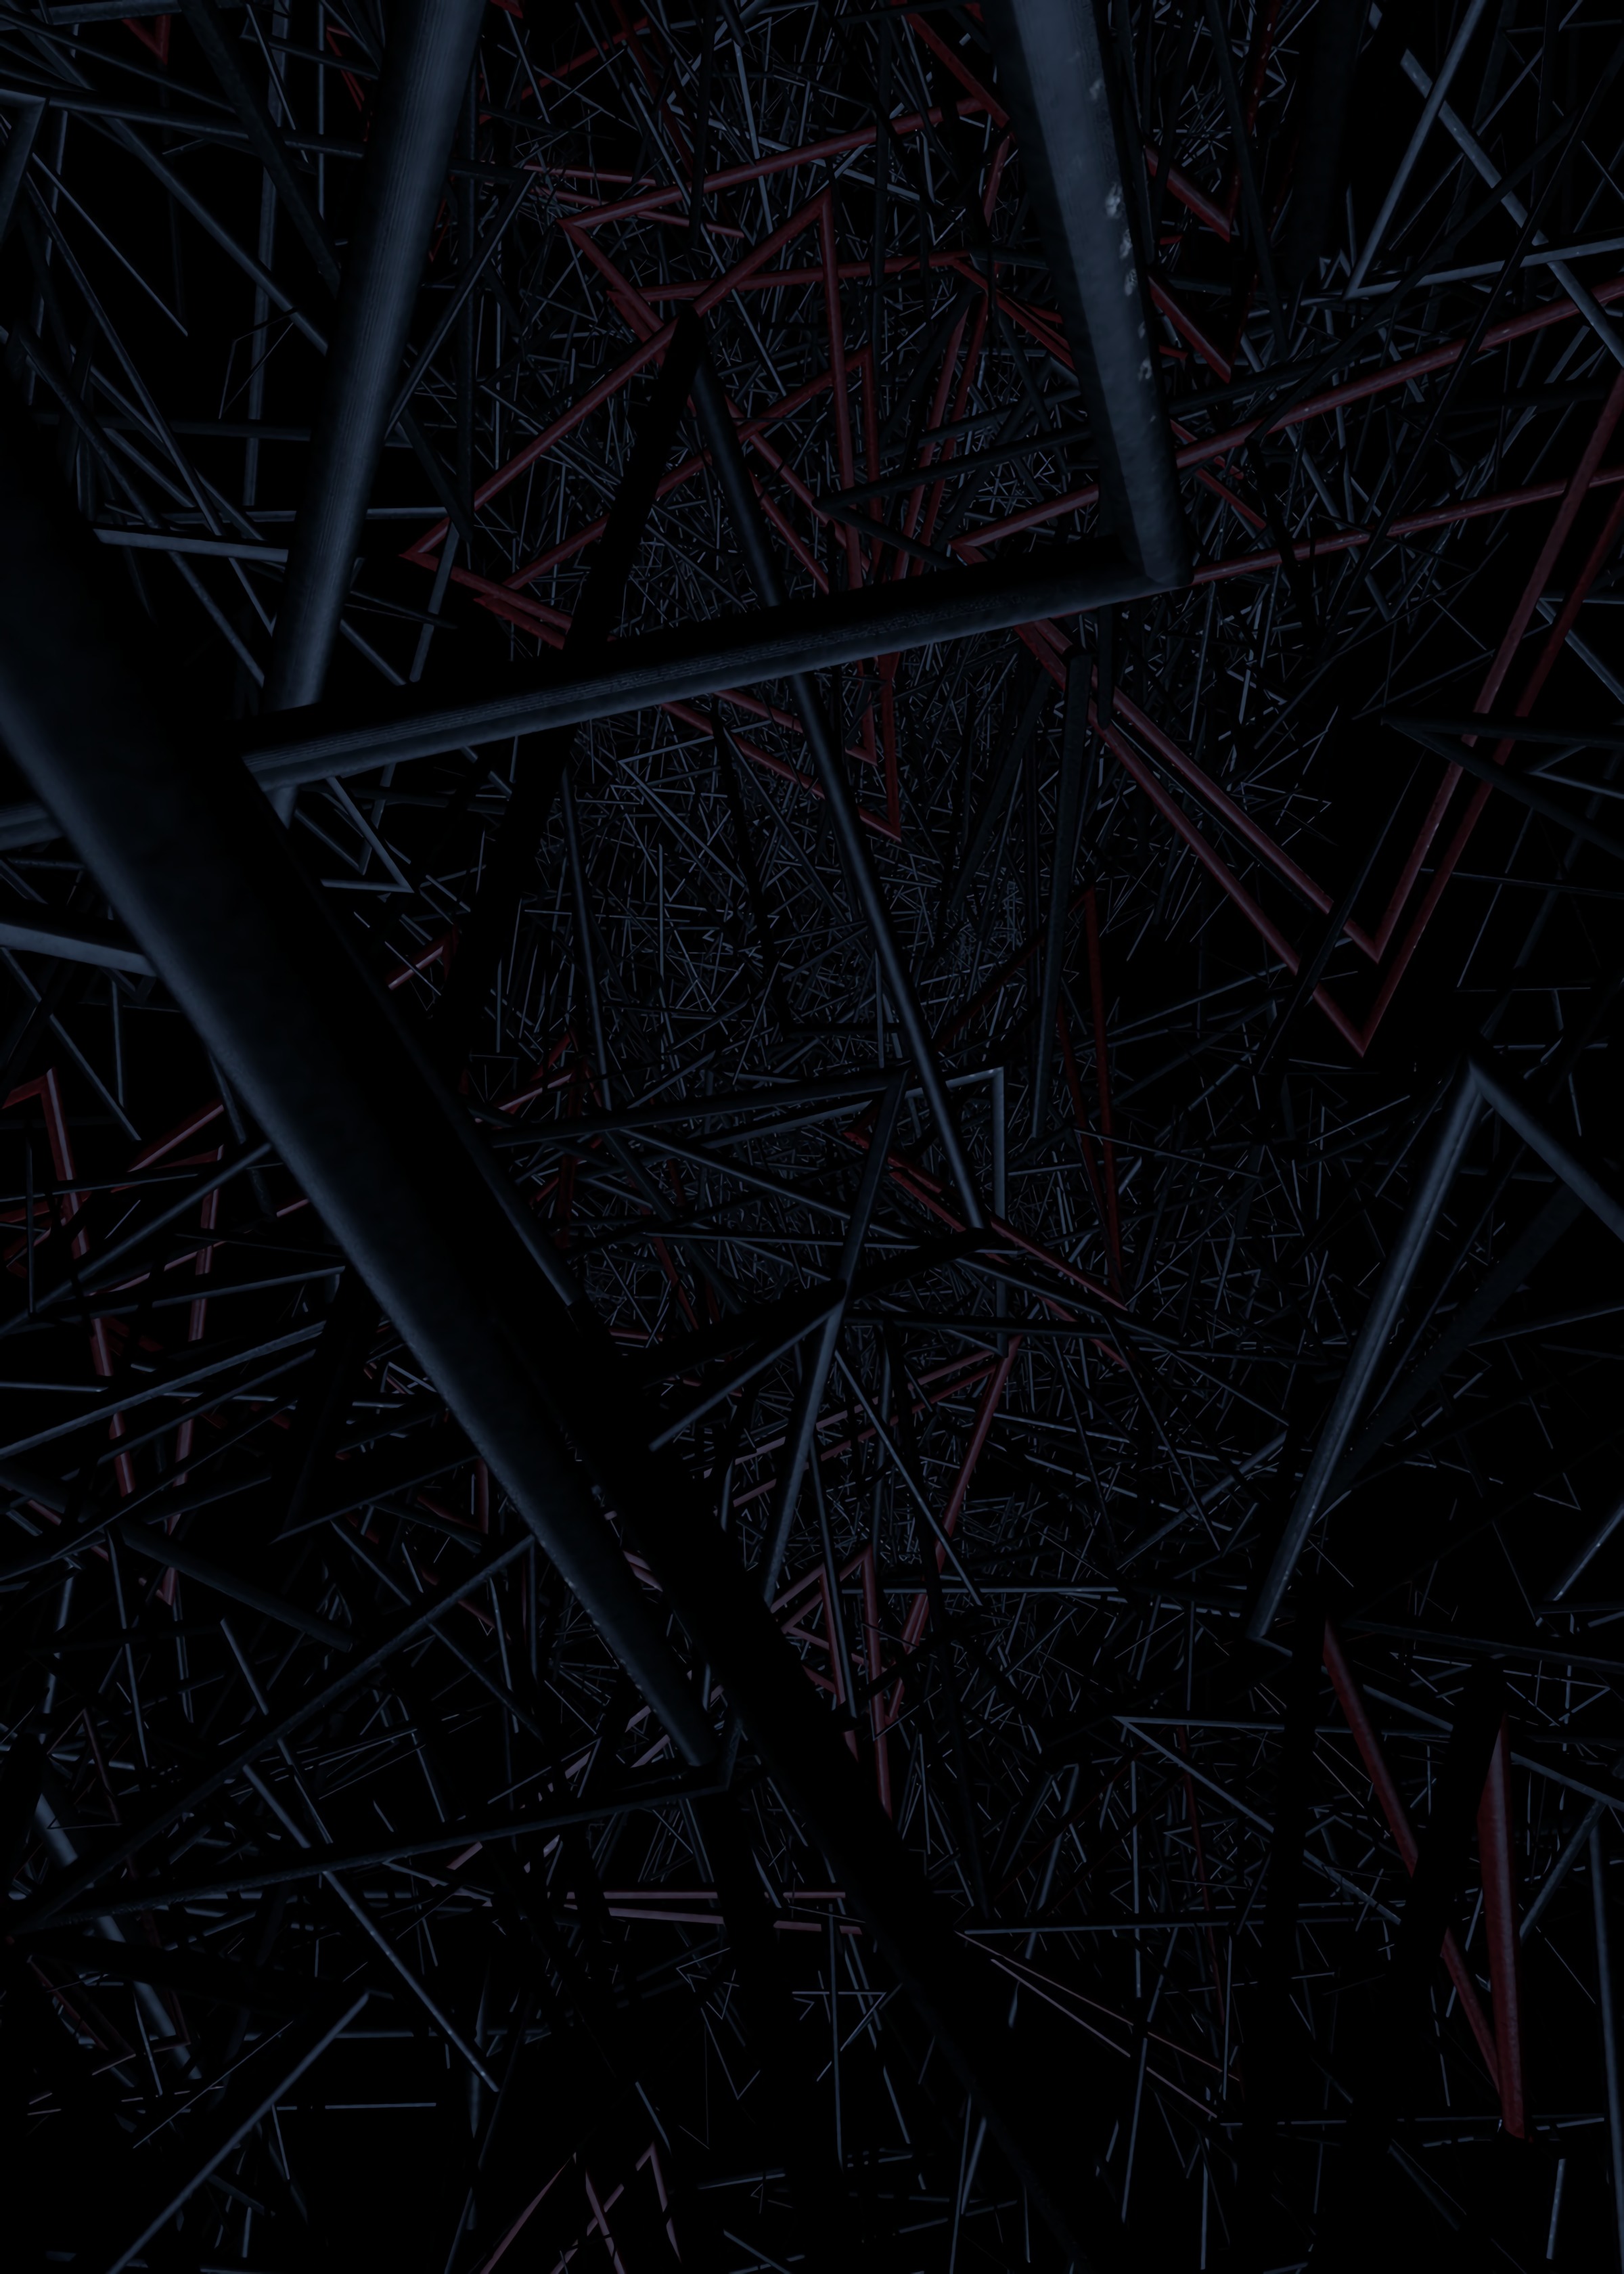 structure, dark, black, confused, intricate, weave, endless, pipes, tubing cell phone wallpapers